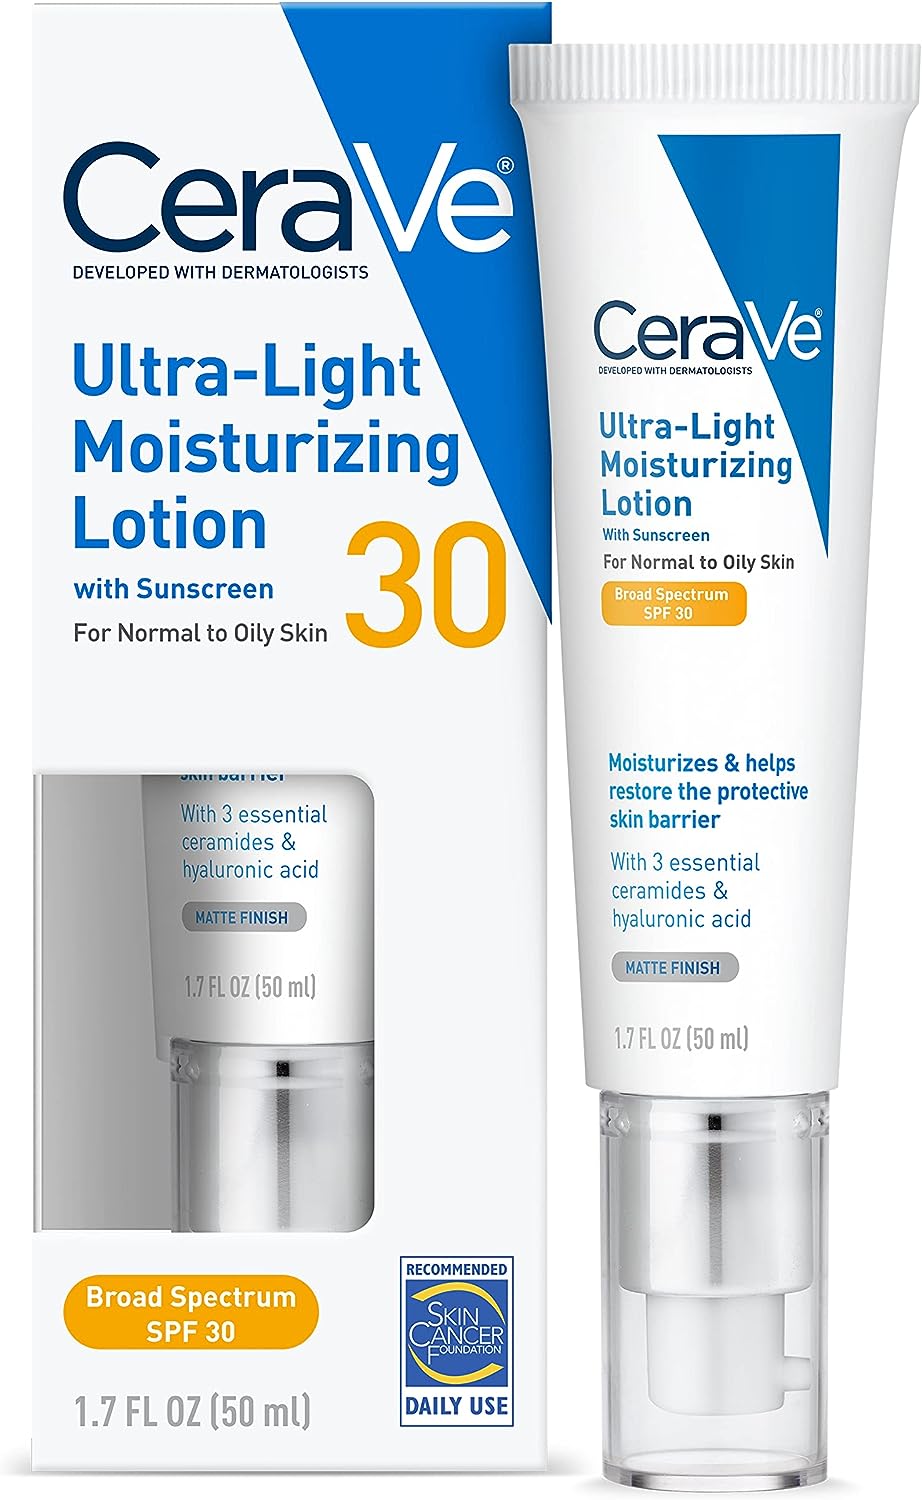 Sunscreen and Face Moisturizer with Hyaluronic Acid & Ceramides